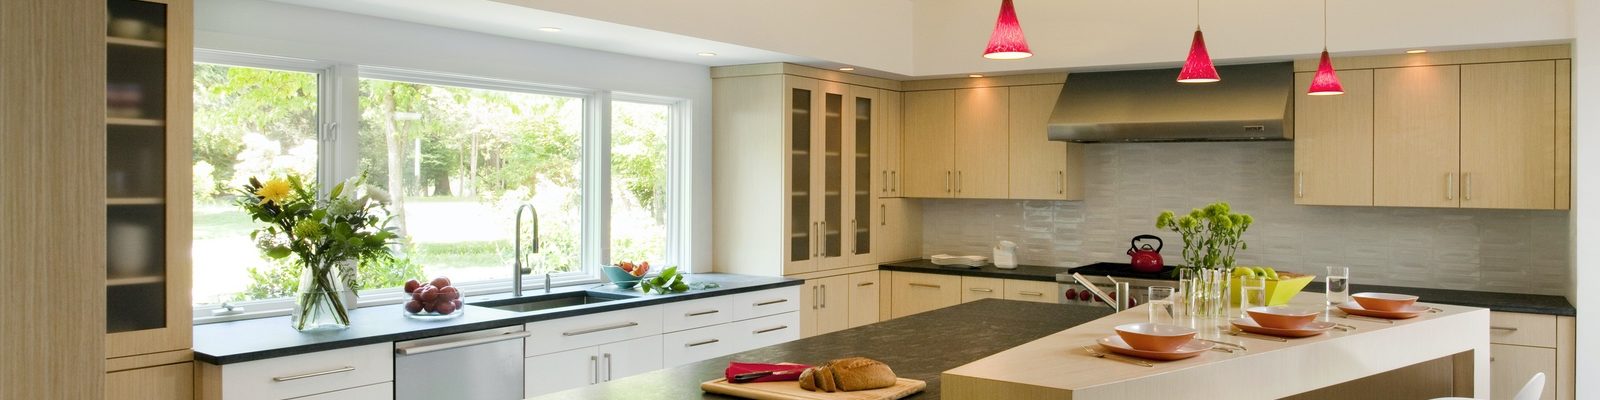 A kitchen design and remodeling project